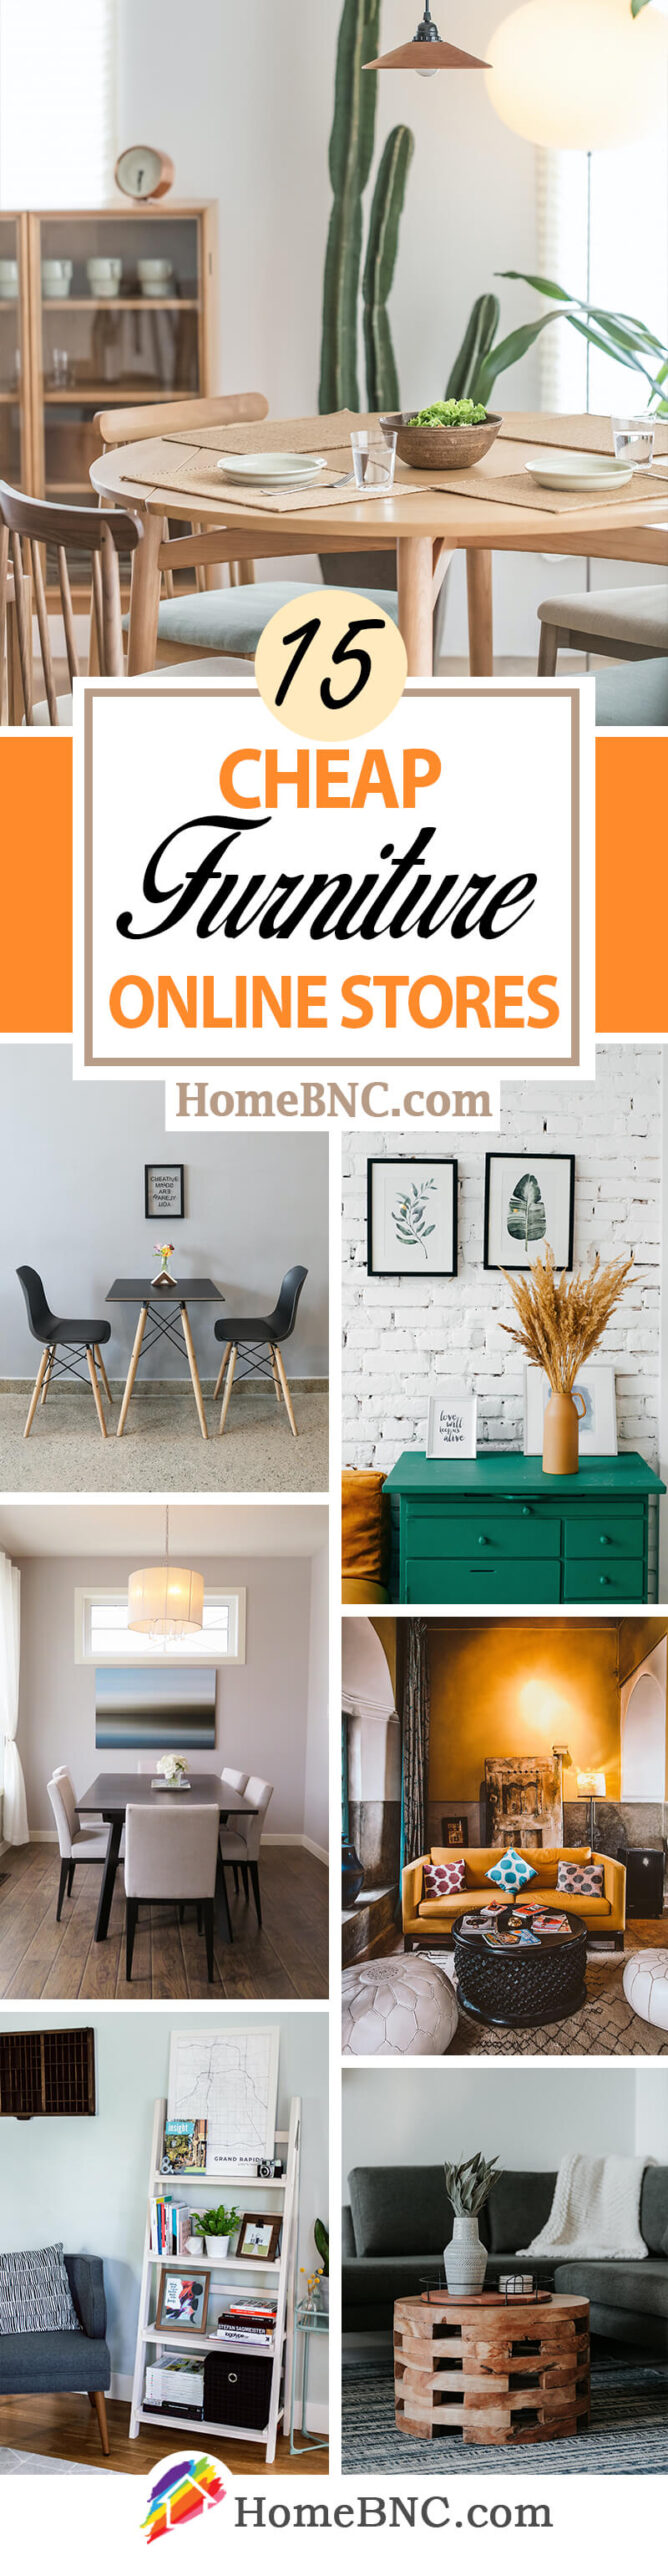 20 Best Cheap Furniture Stores Online for a Home Upgrade in 20